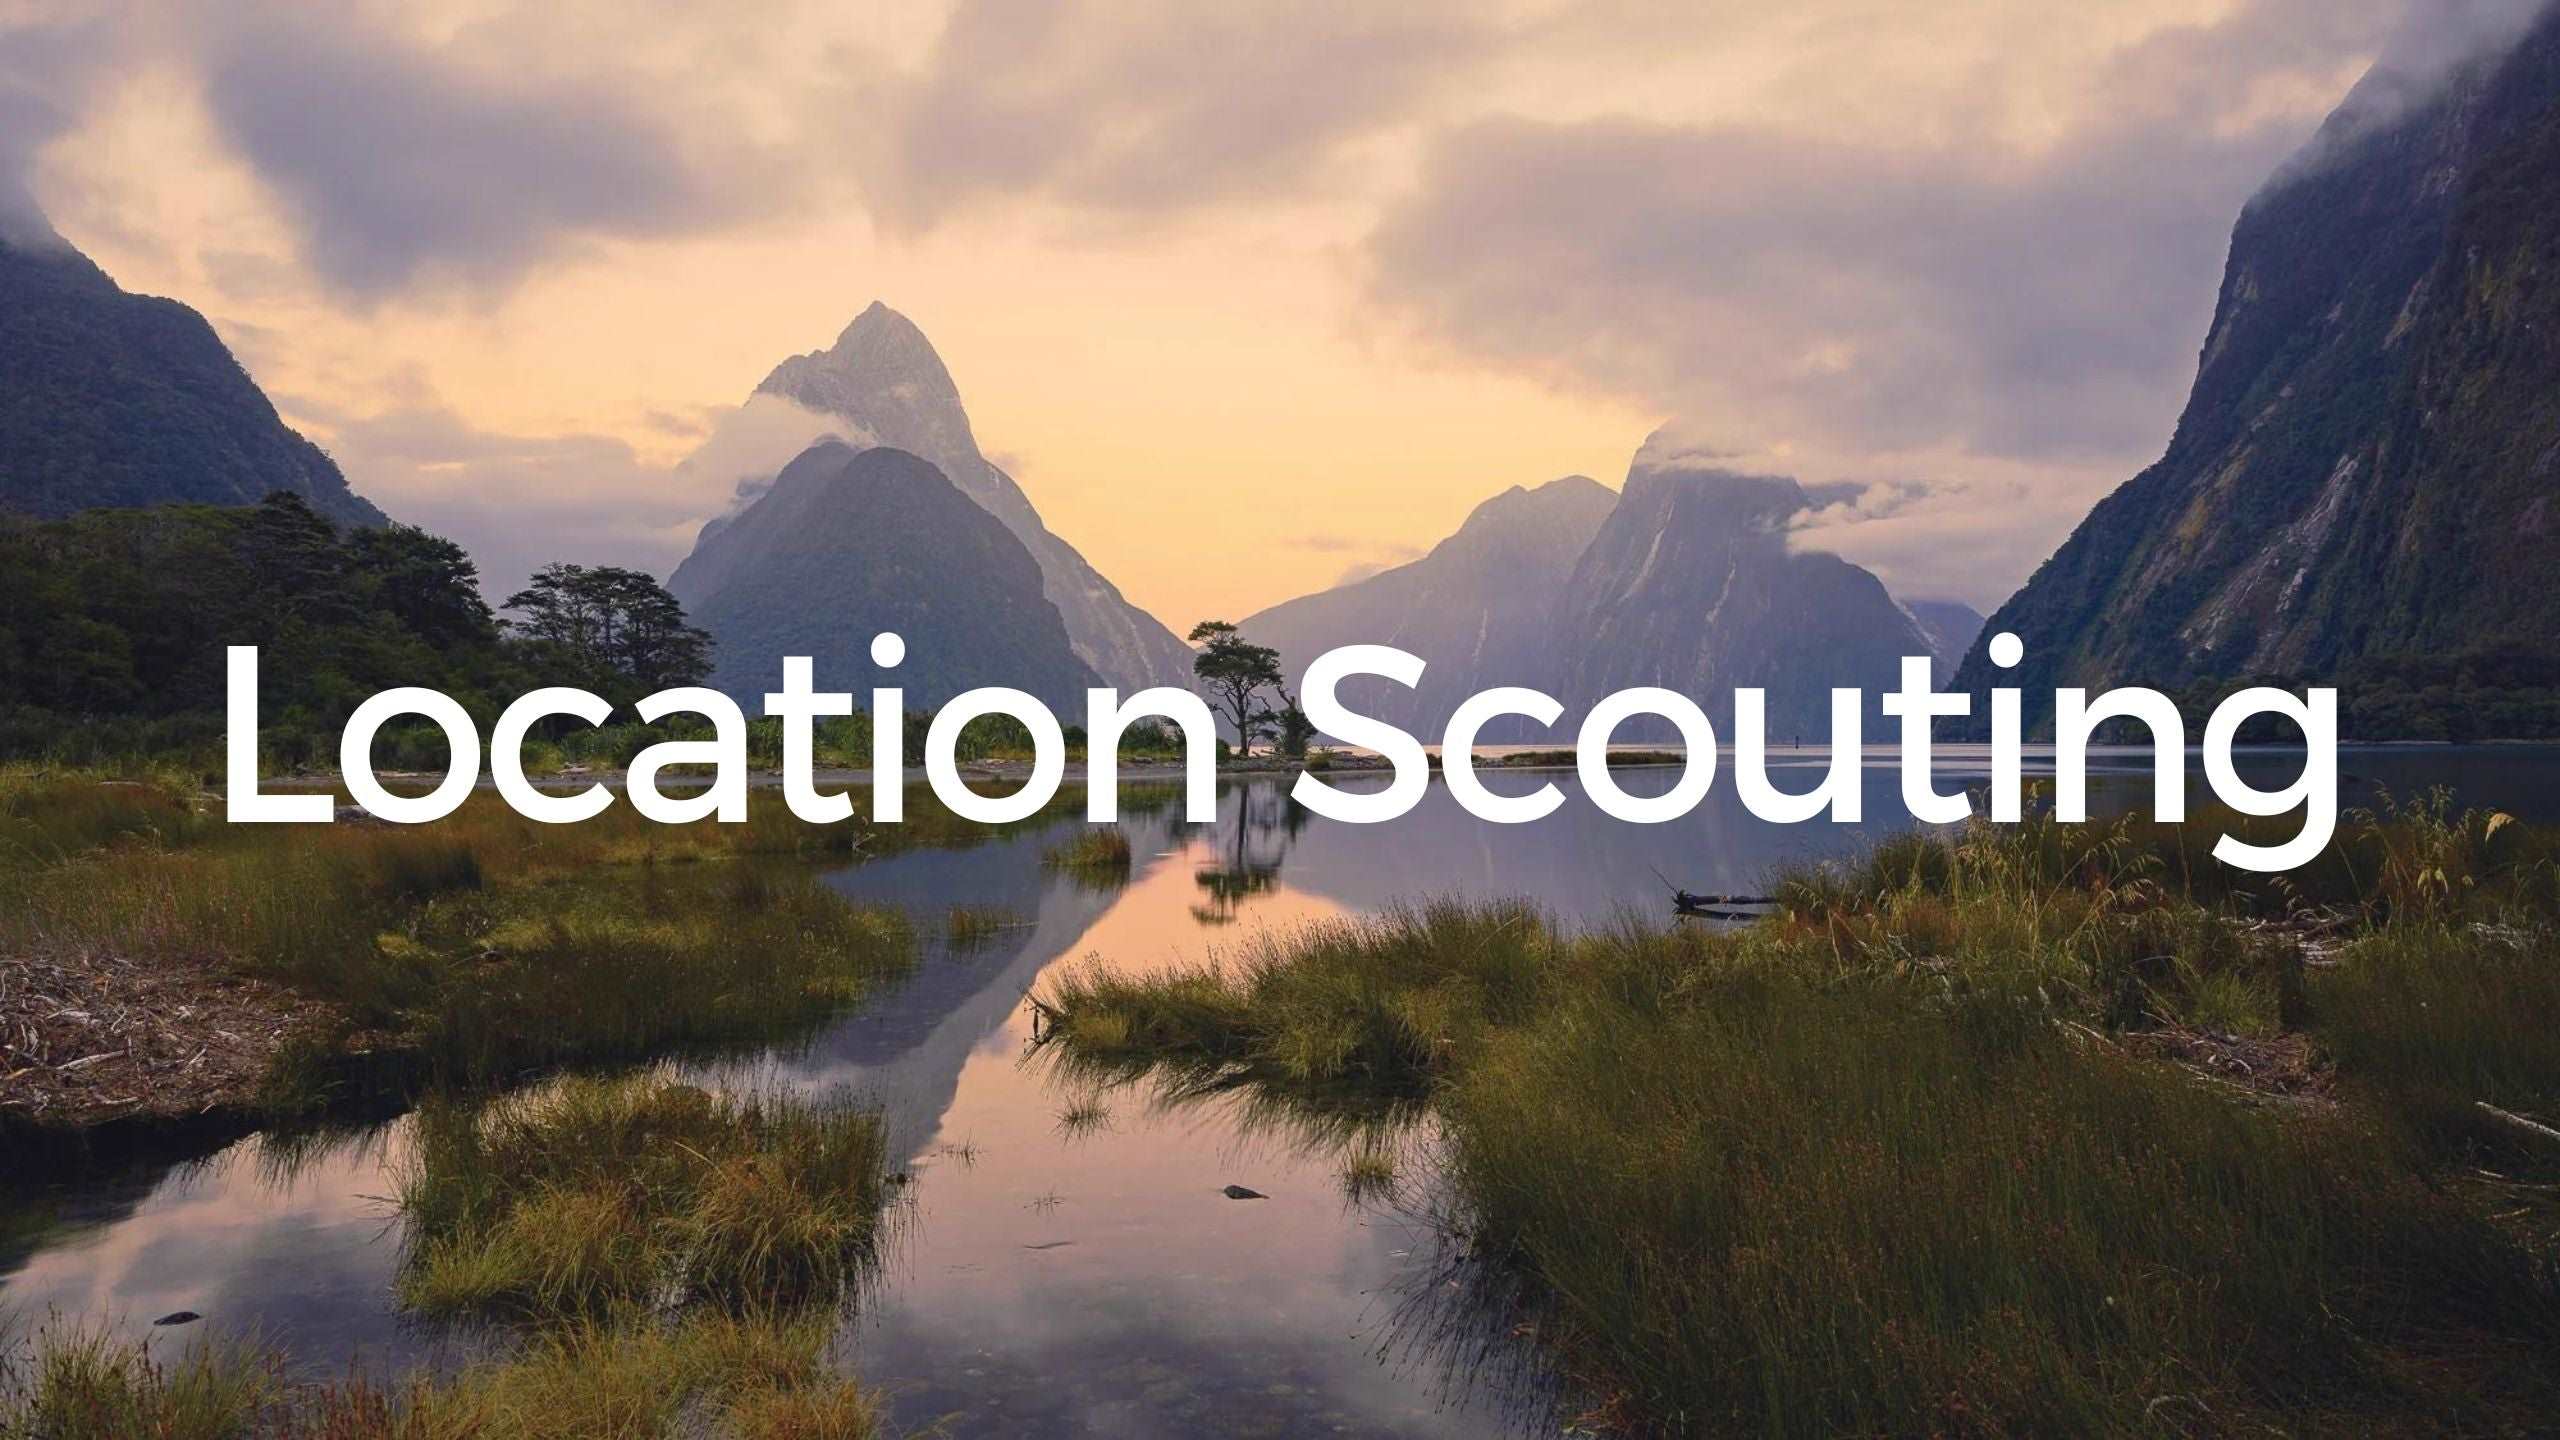 New Zealand Location Scouting Services for Filmmakers and Content Creators - Stephen Milner